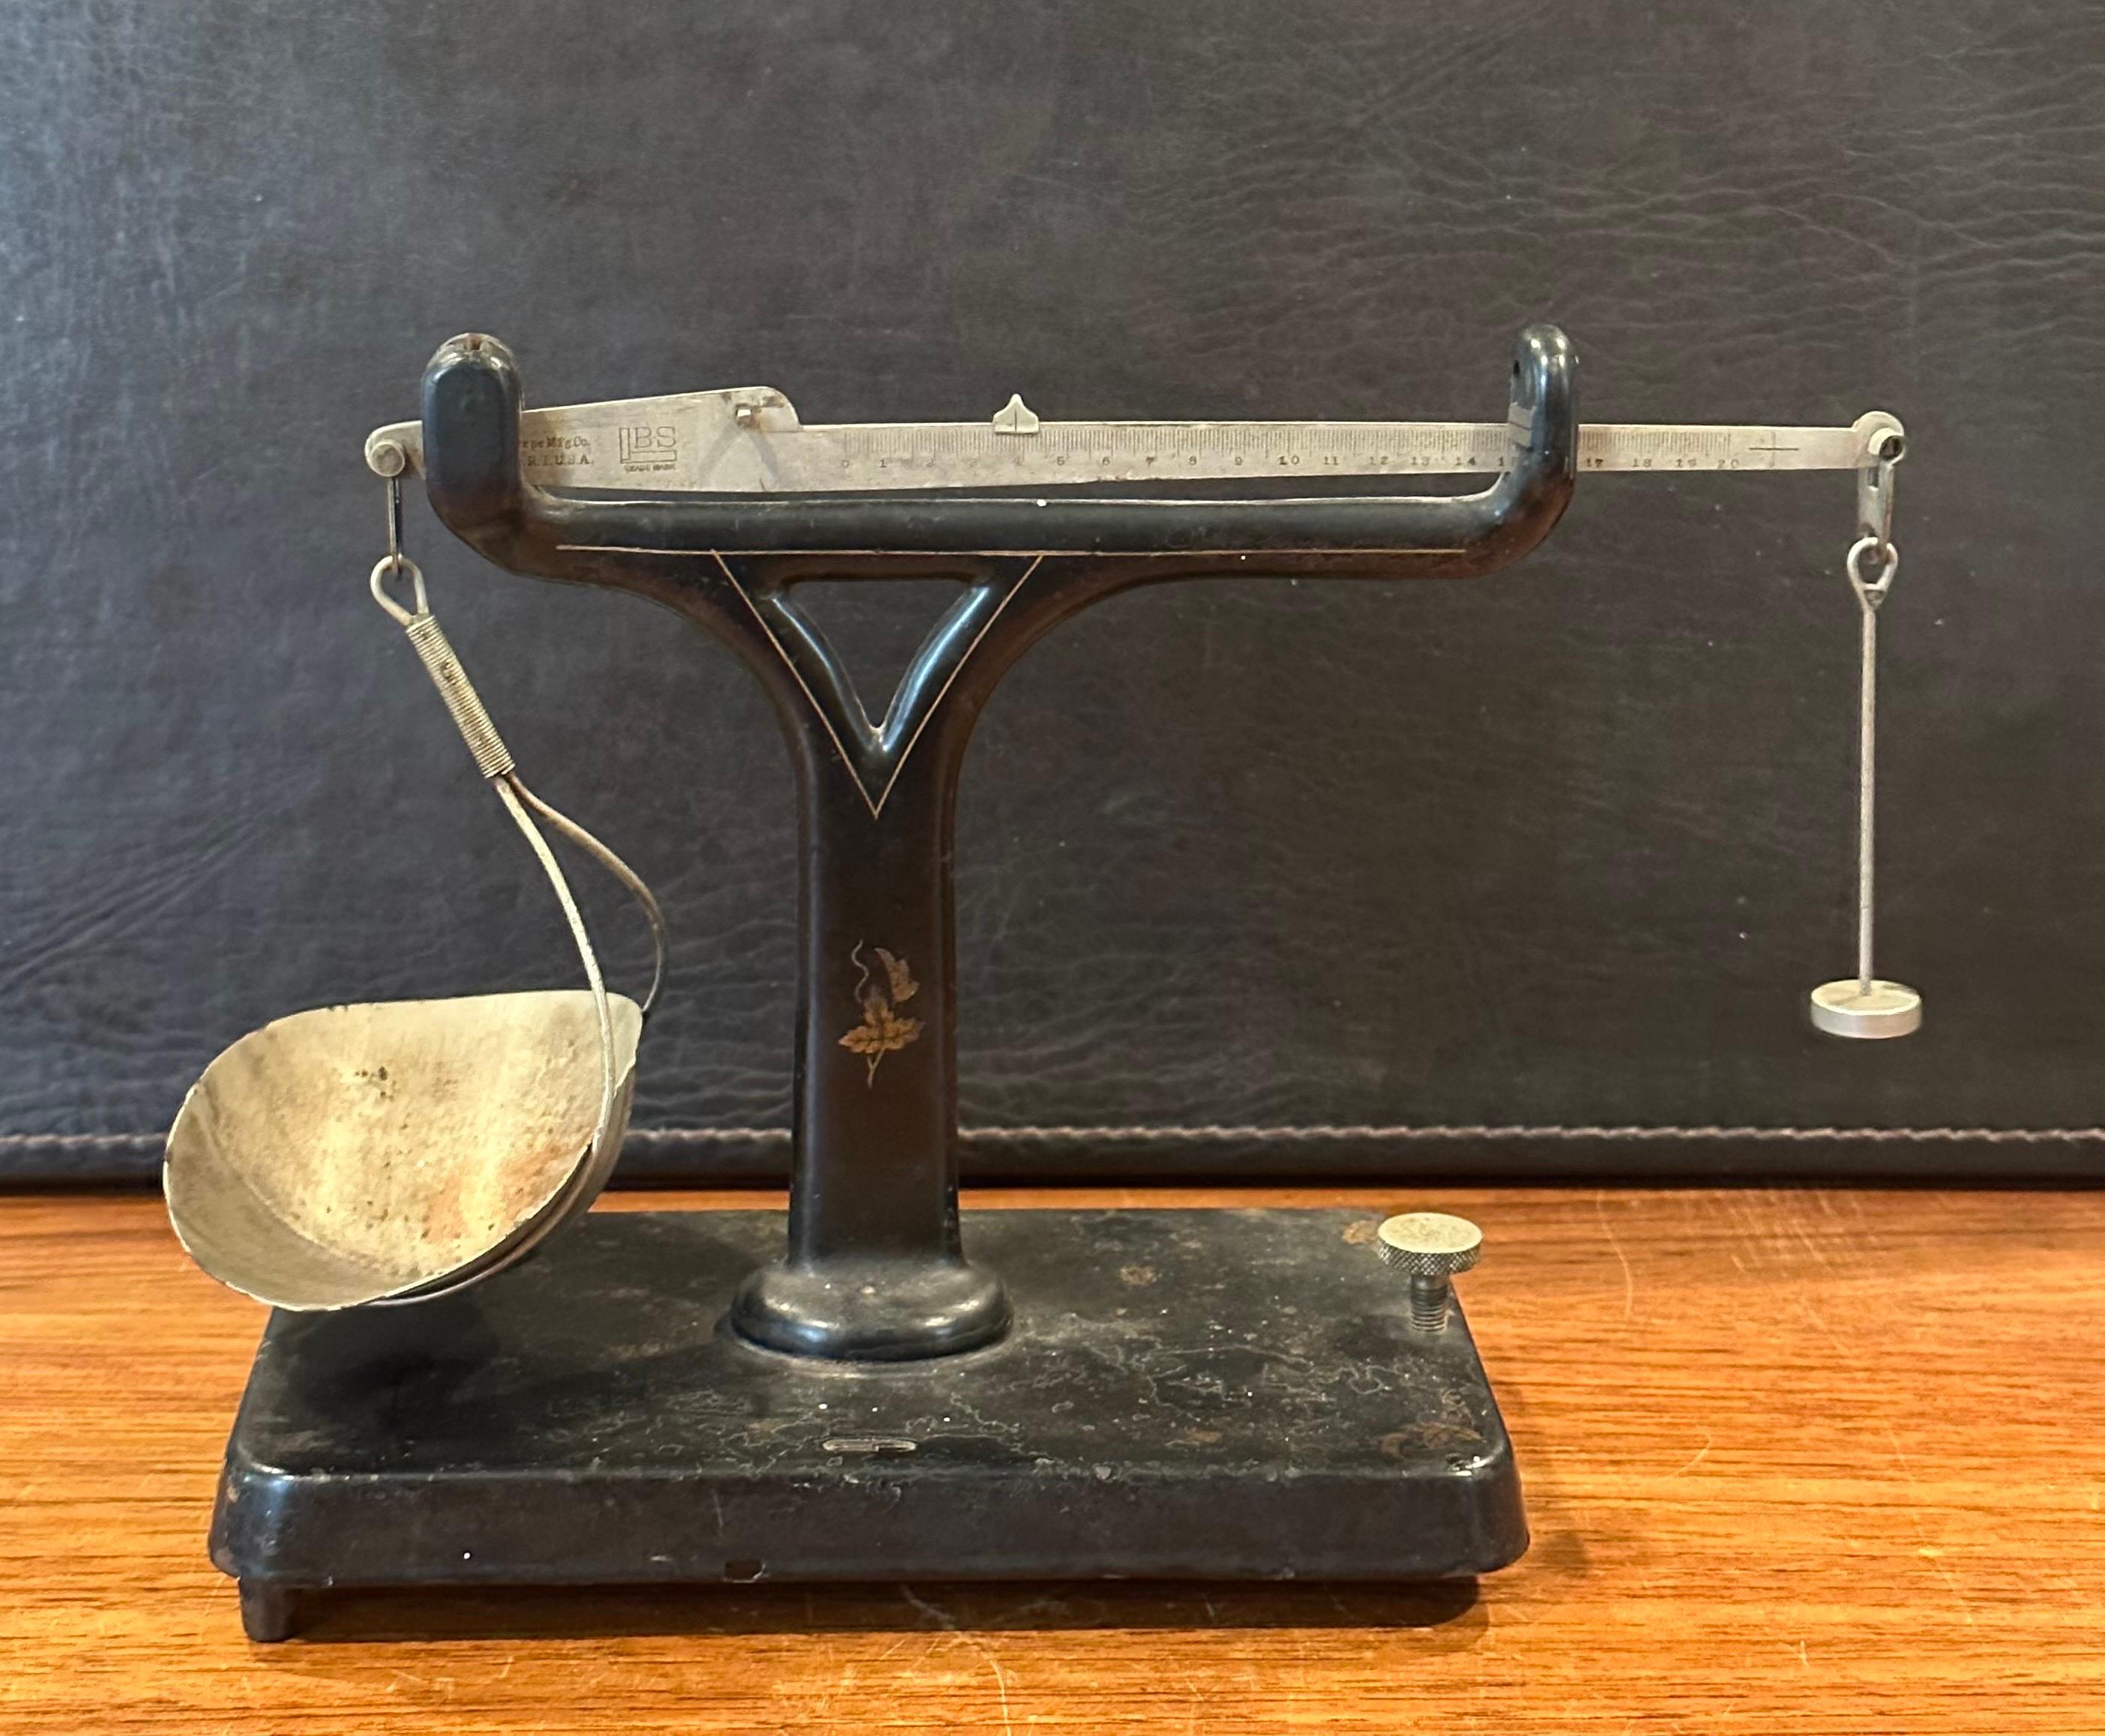 Philippine Model #309-1 Vintage Scale and Weights by Brown & Sharpe Mfg. For Sale